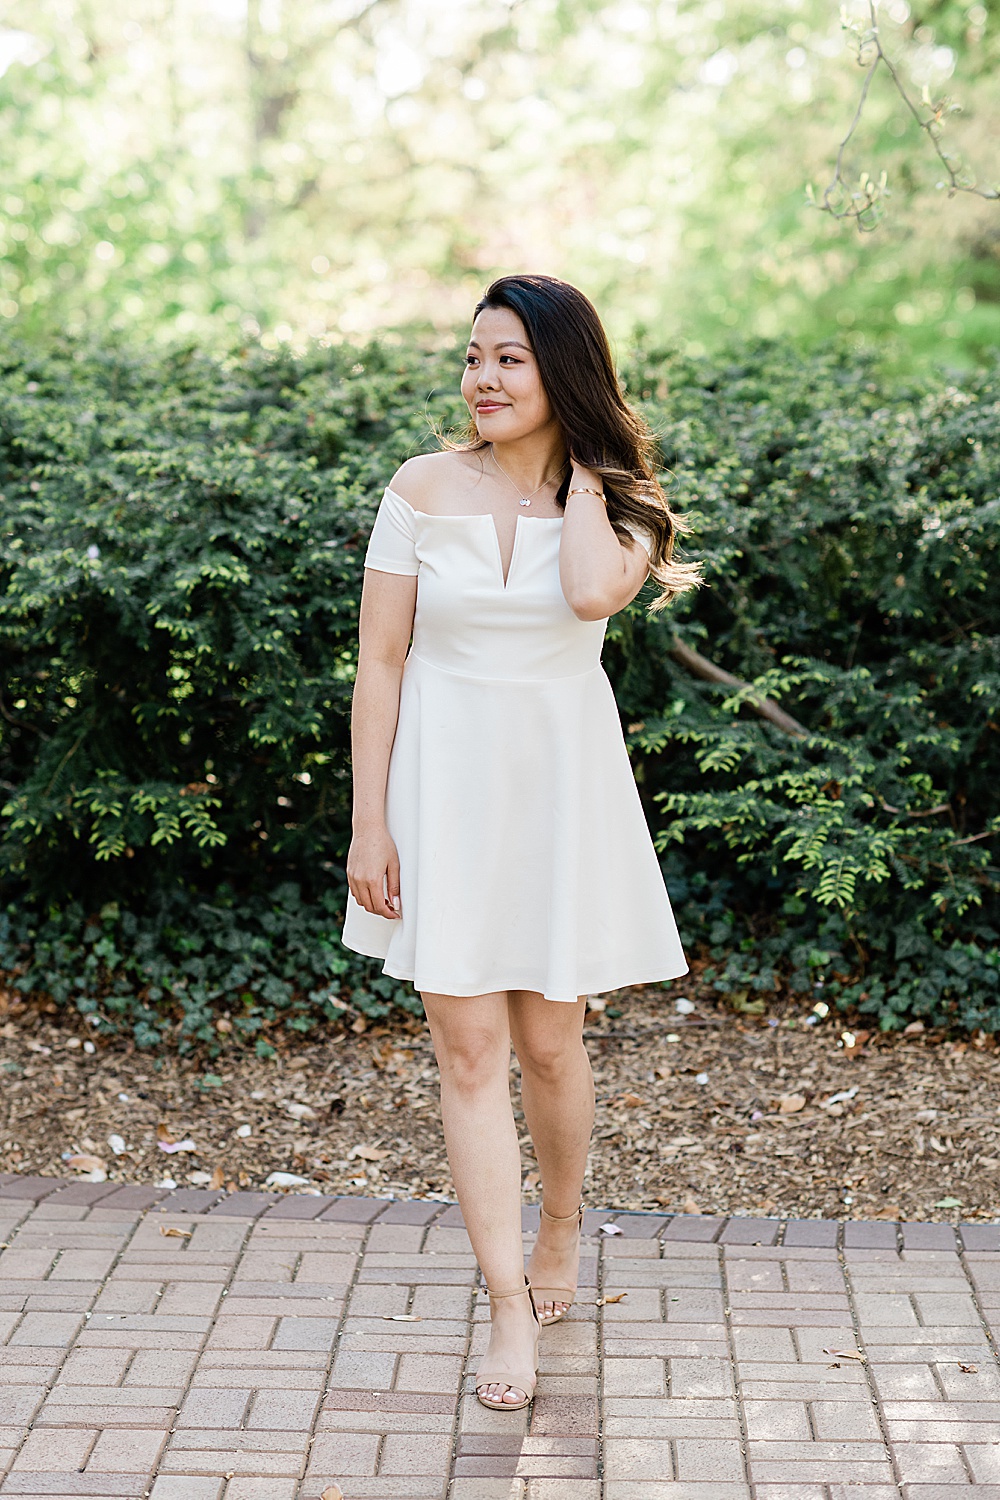 Michigan State Senior grad photoshoot on MSU's campus, photo of a woman in a white dress with a golden glow and greenery in the background, by Allie Siarto & Co., East Lansing photographers